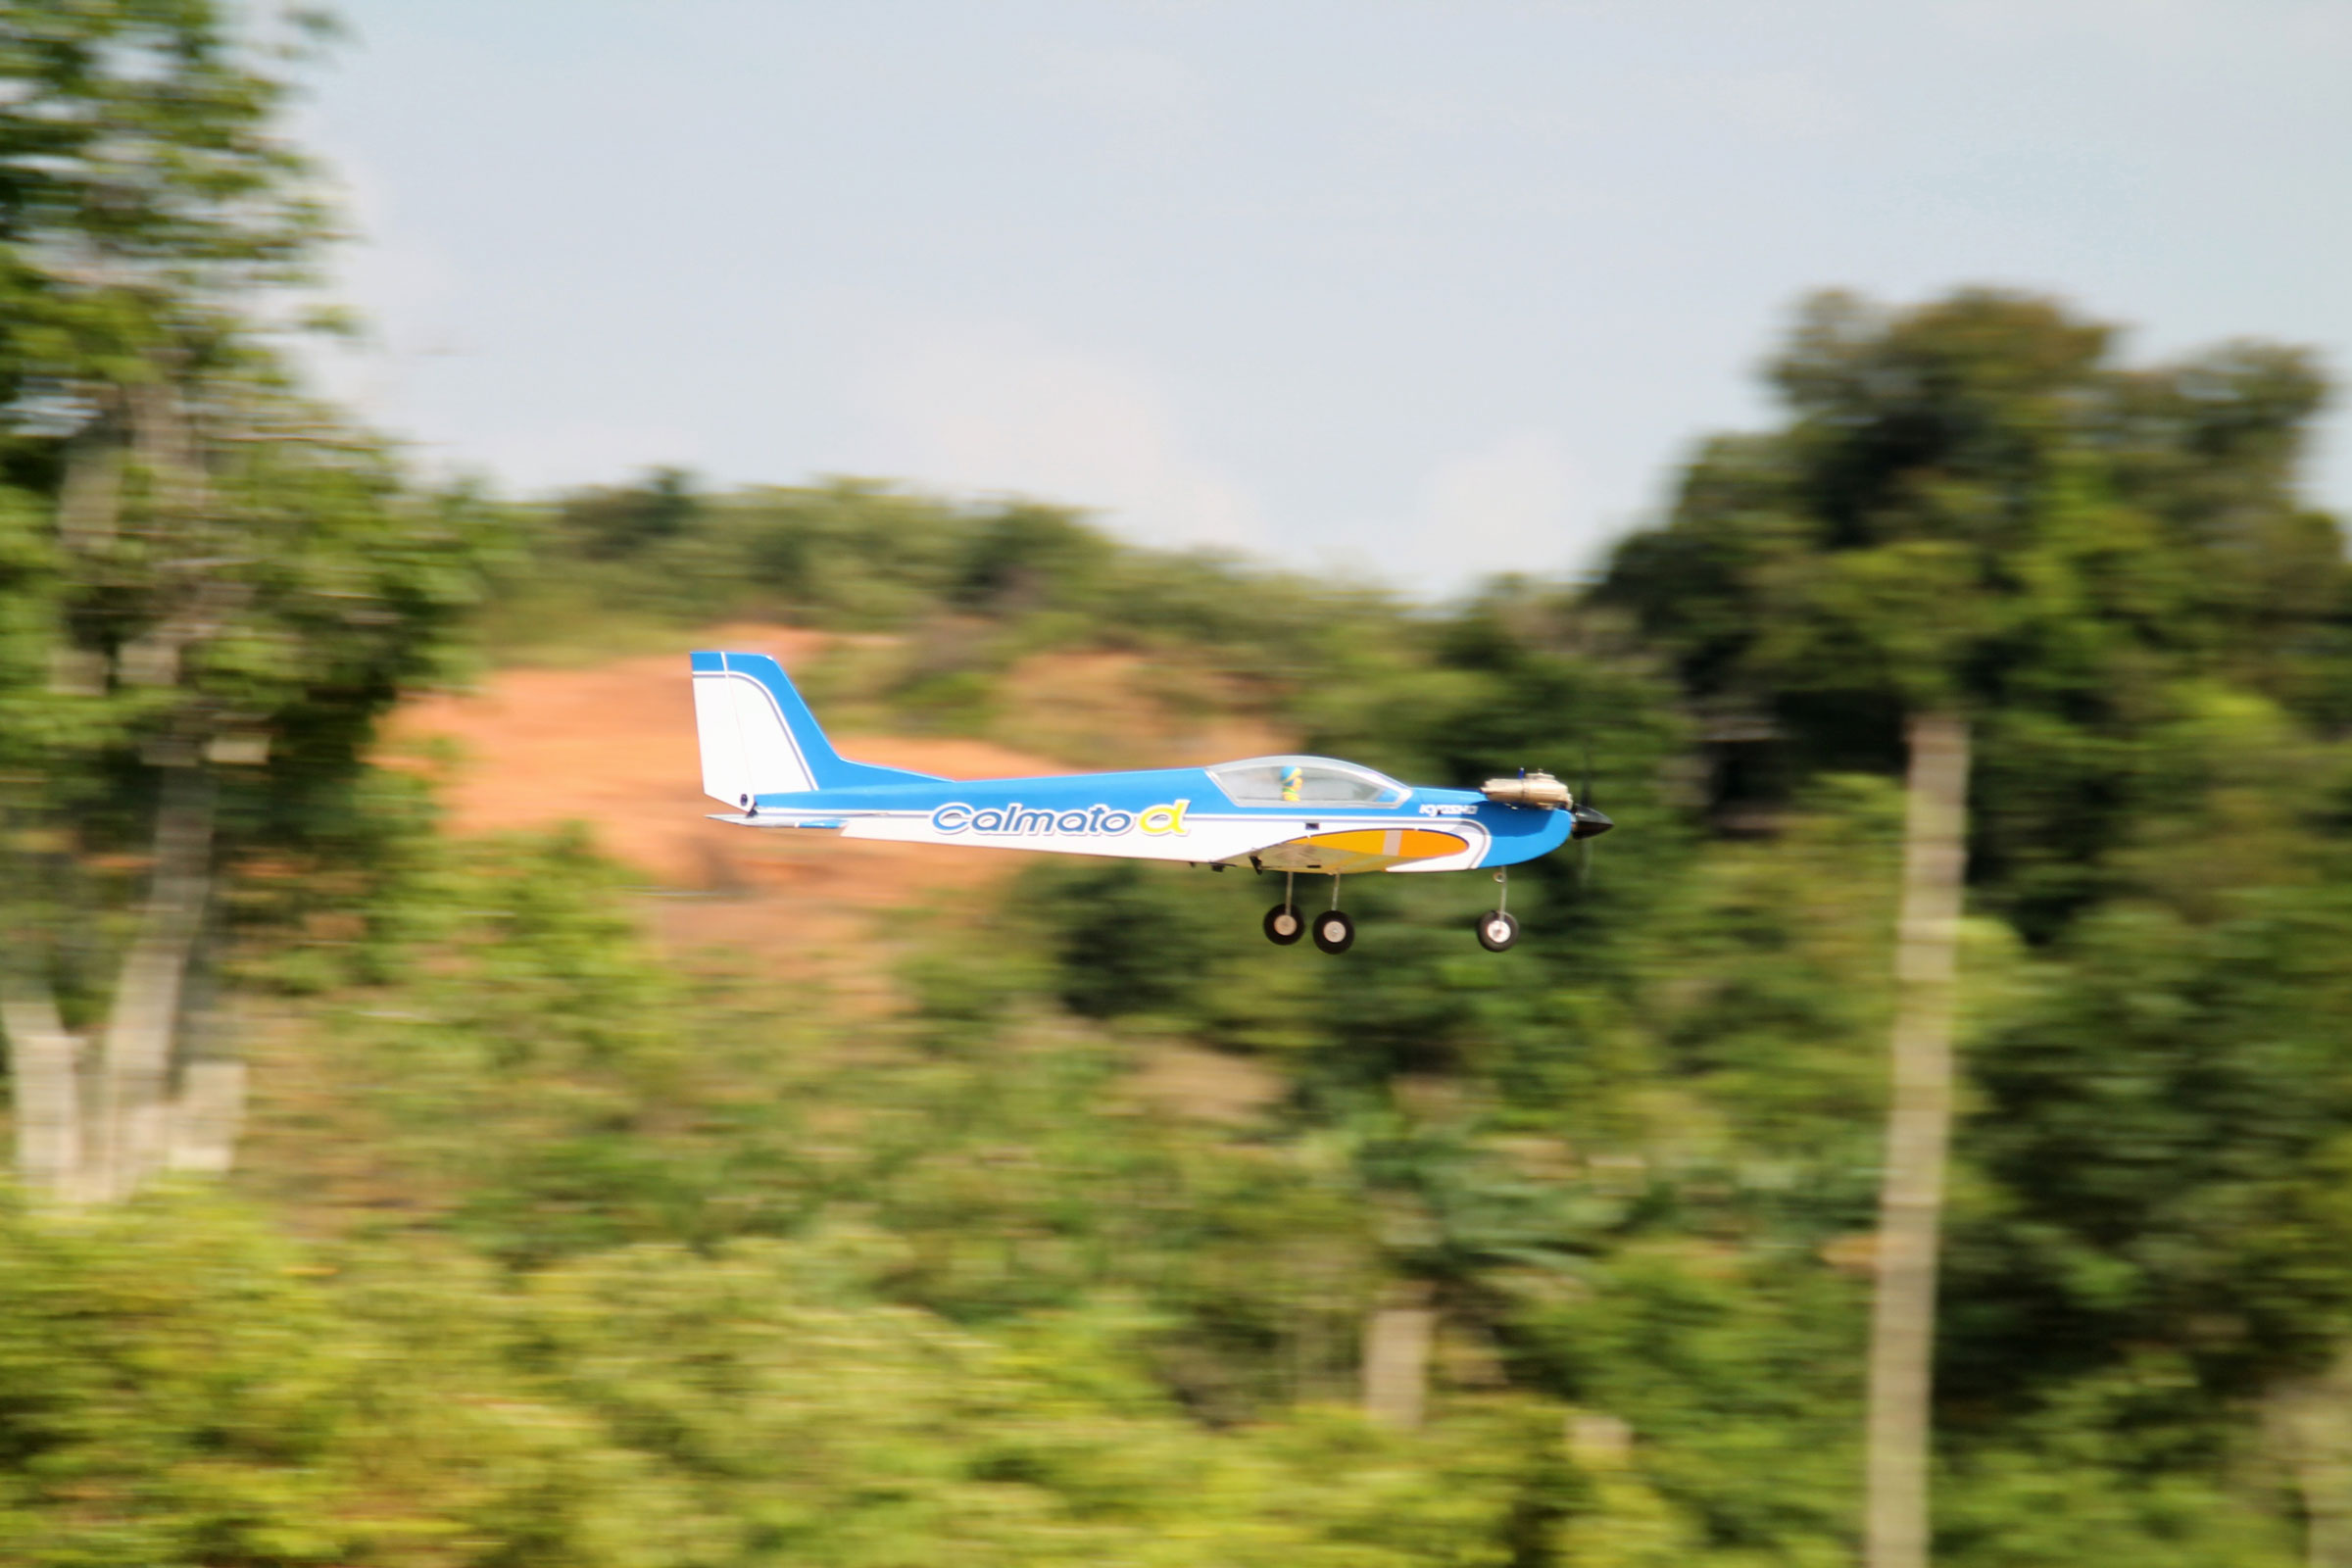 Remote controlled airplane passing photo